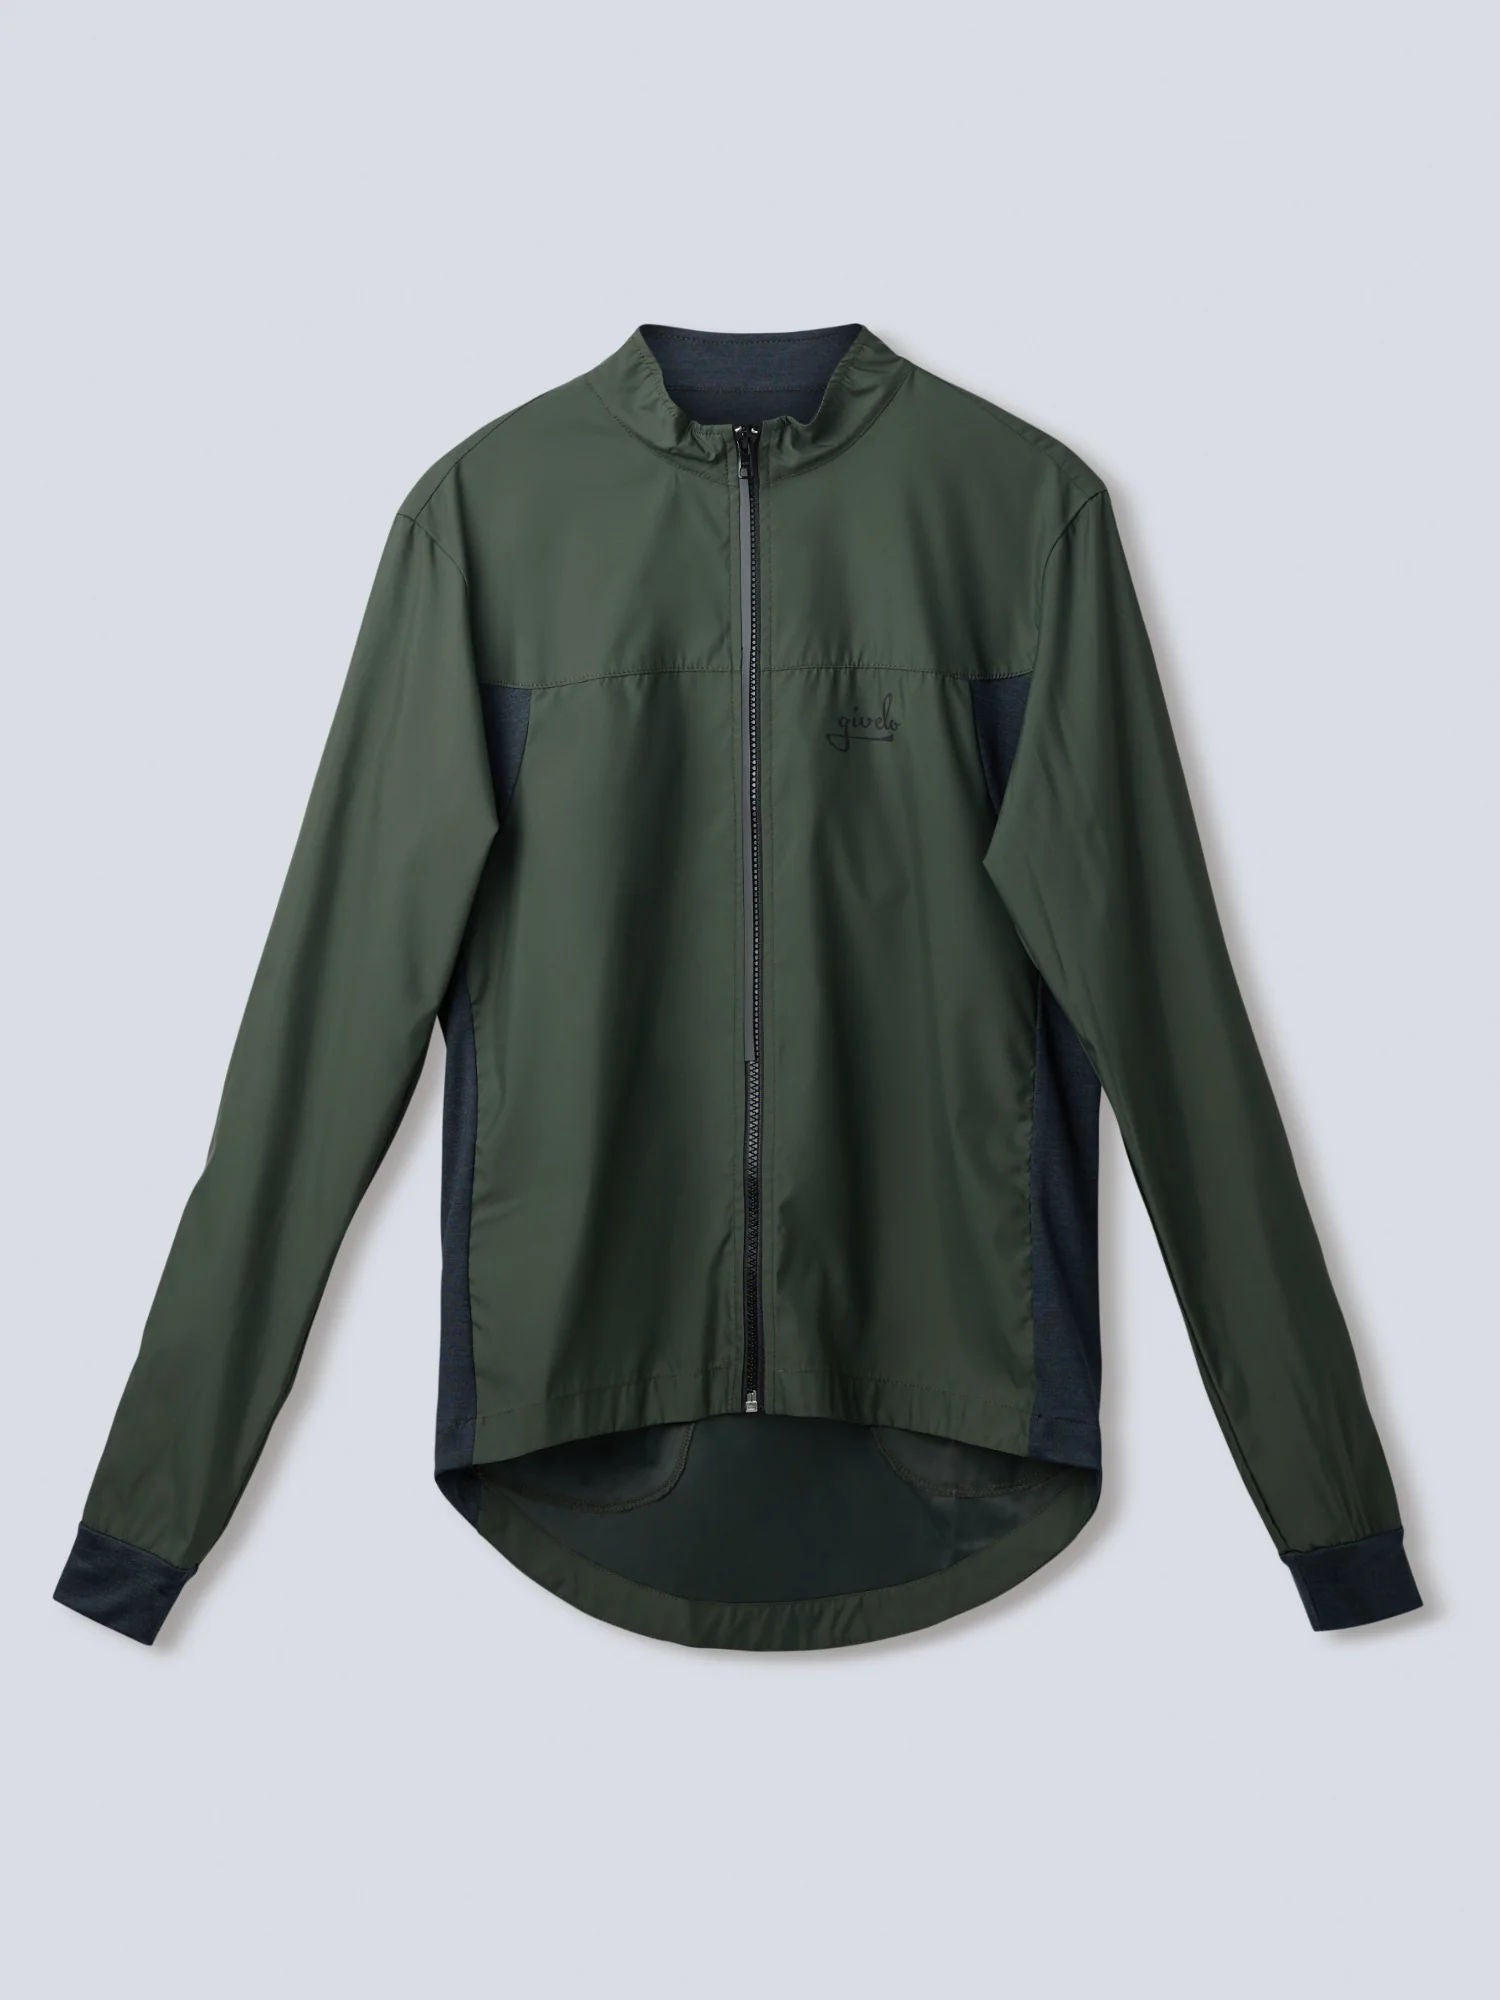 Givelo Military Green Quick Free レディース サイクル ウィンドジャケット | GEARED